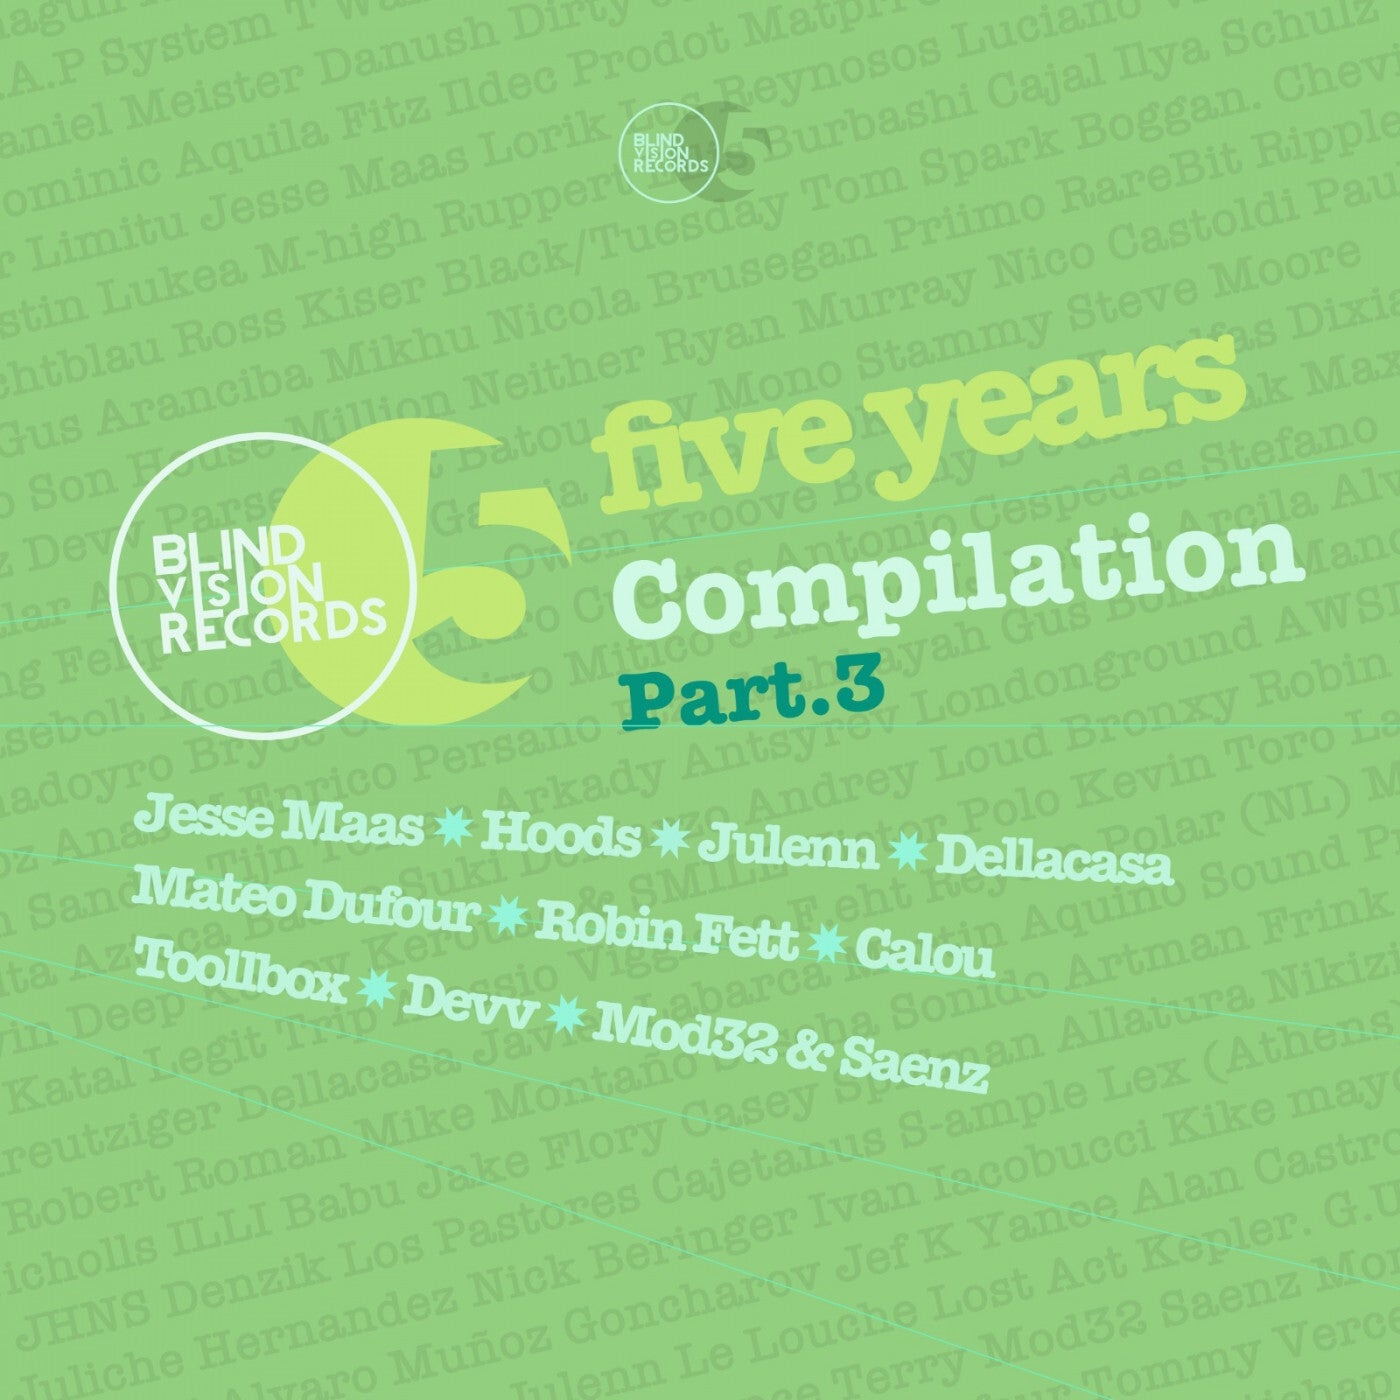 Download Five Years Compilation Part 3 on Electrobuzz